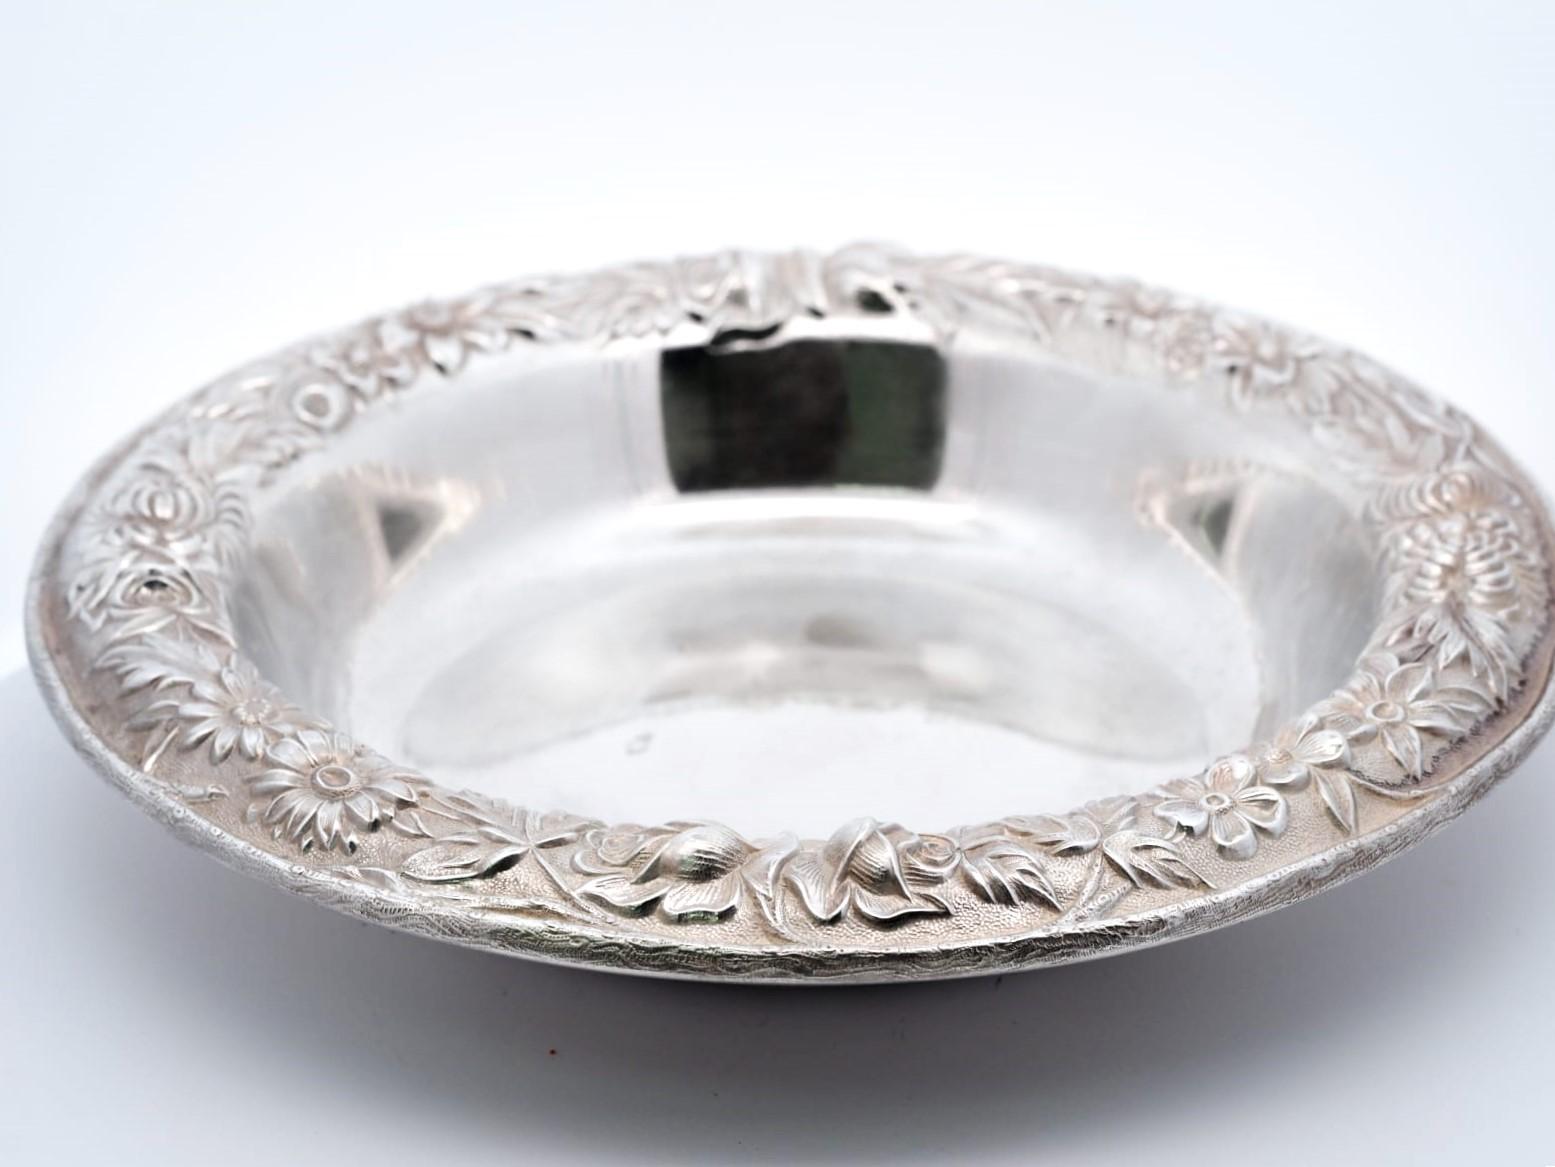 This elegant bon bon bowl from S. Kirk & Son features the intricate Repousse pattern, crafted from high-quality Sterling Silver (.925). With a weight of 5.9 oz (168g), this antique piece from the early 20th century is perfect for collectors of fine